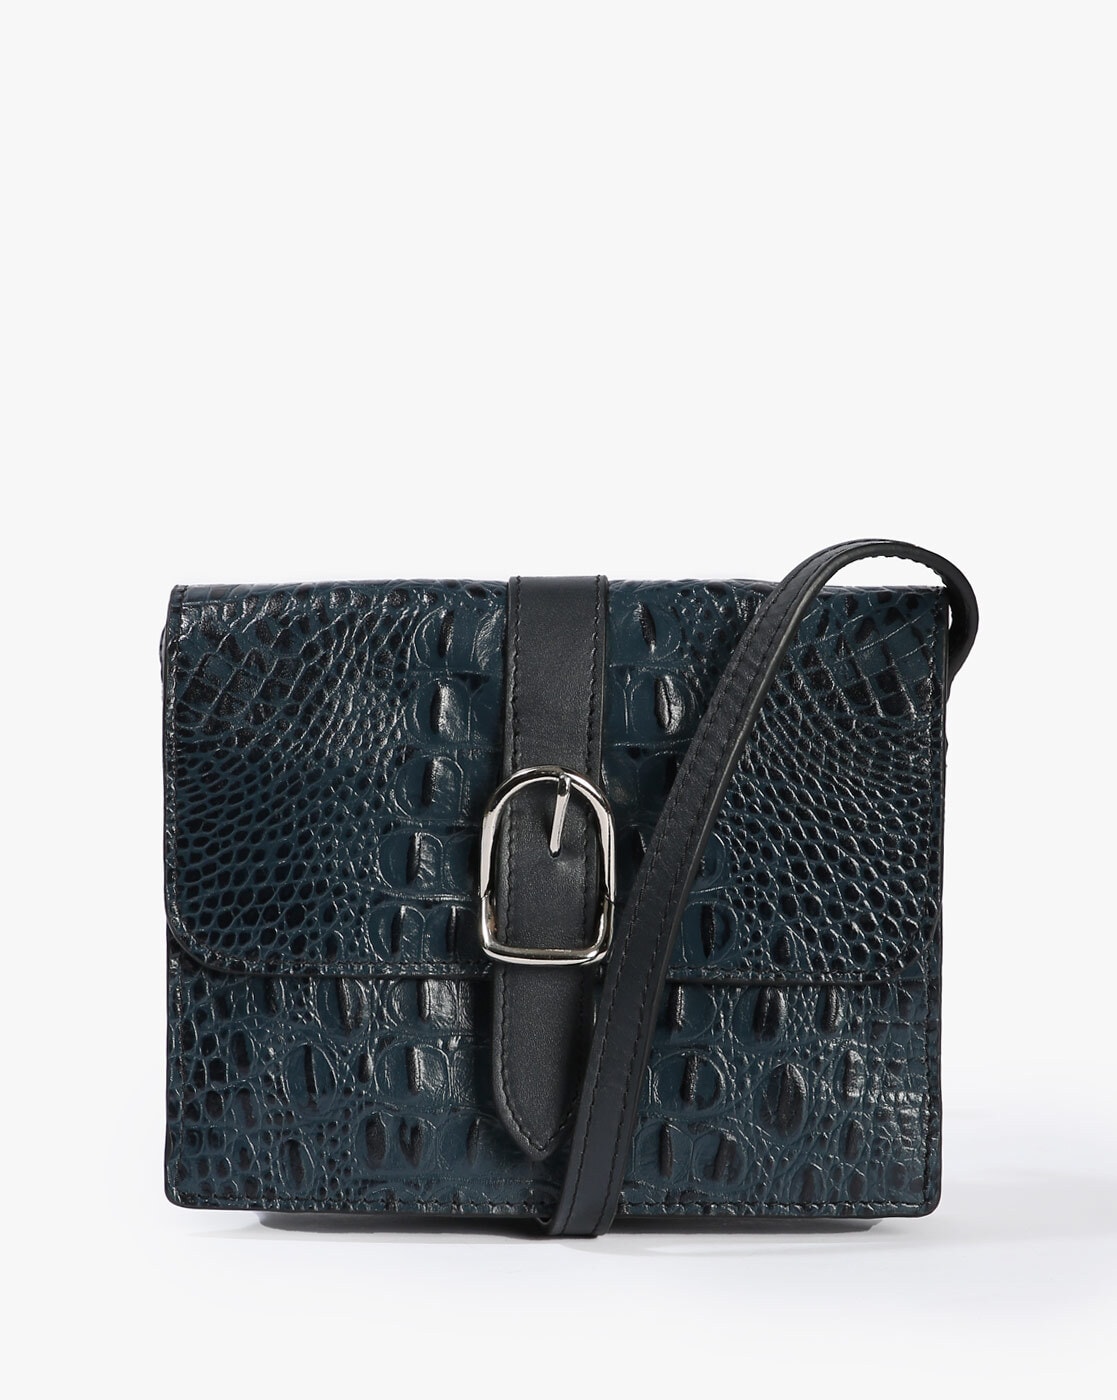 embossed leather clutch